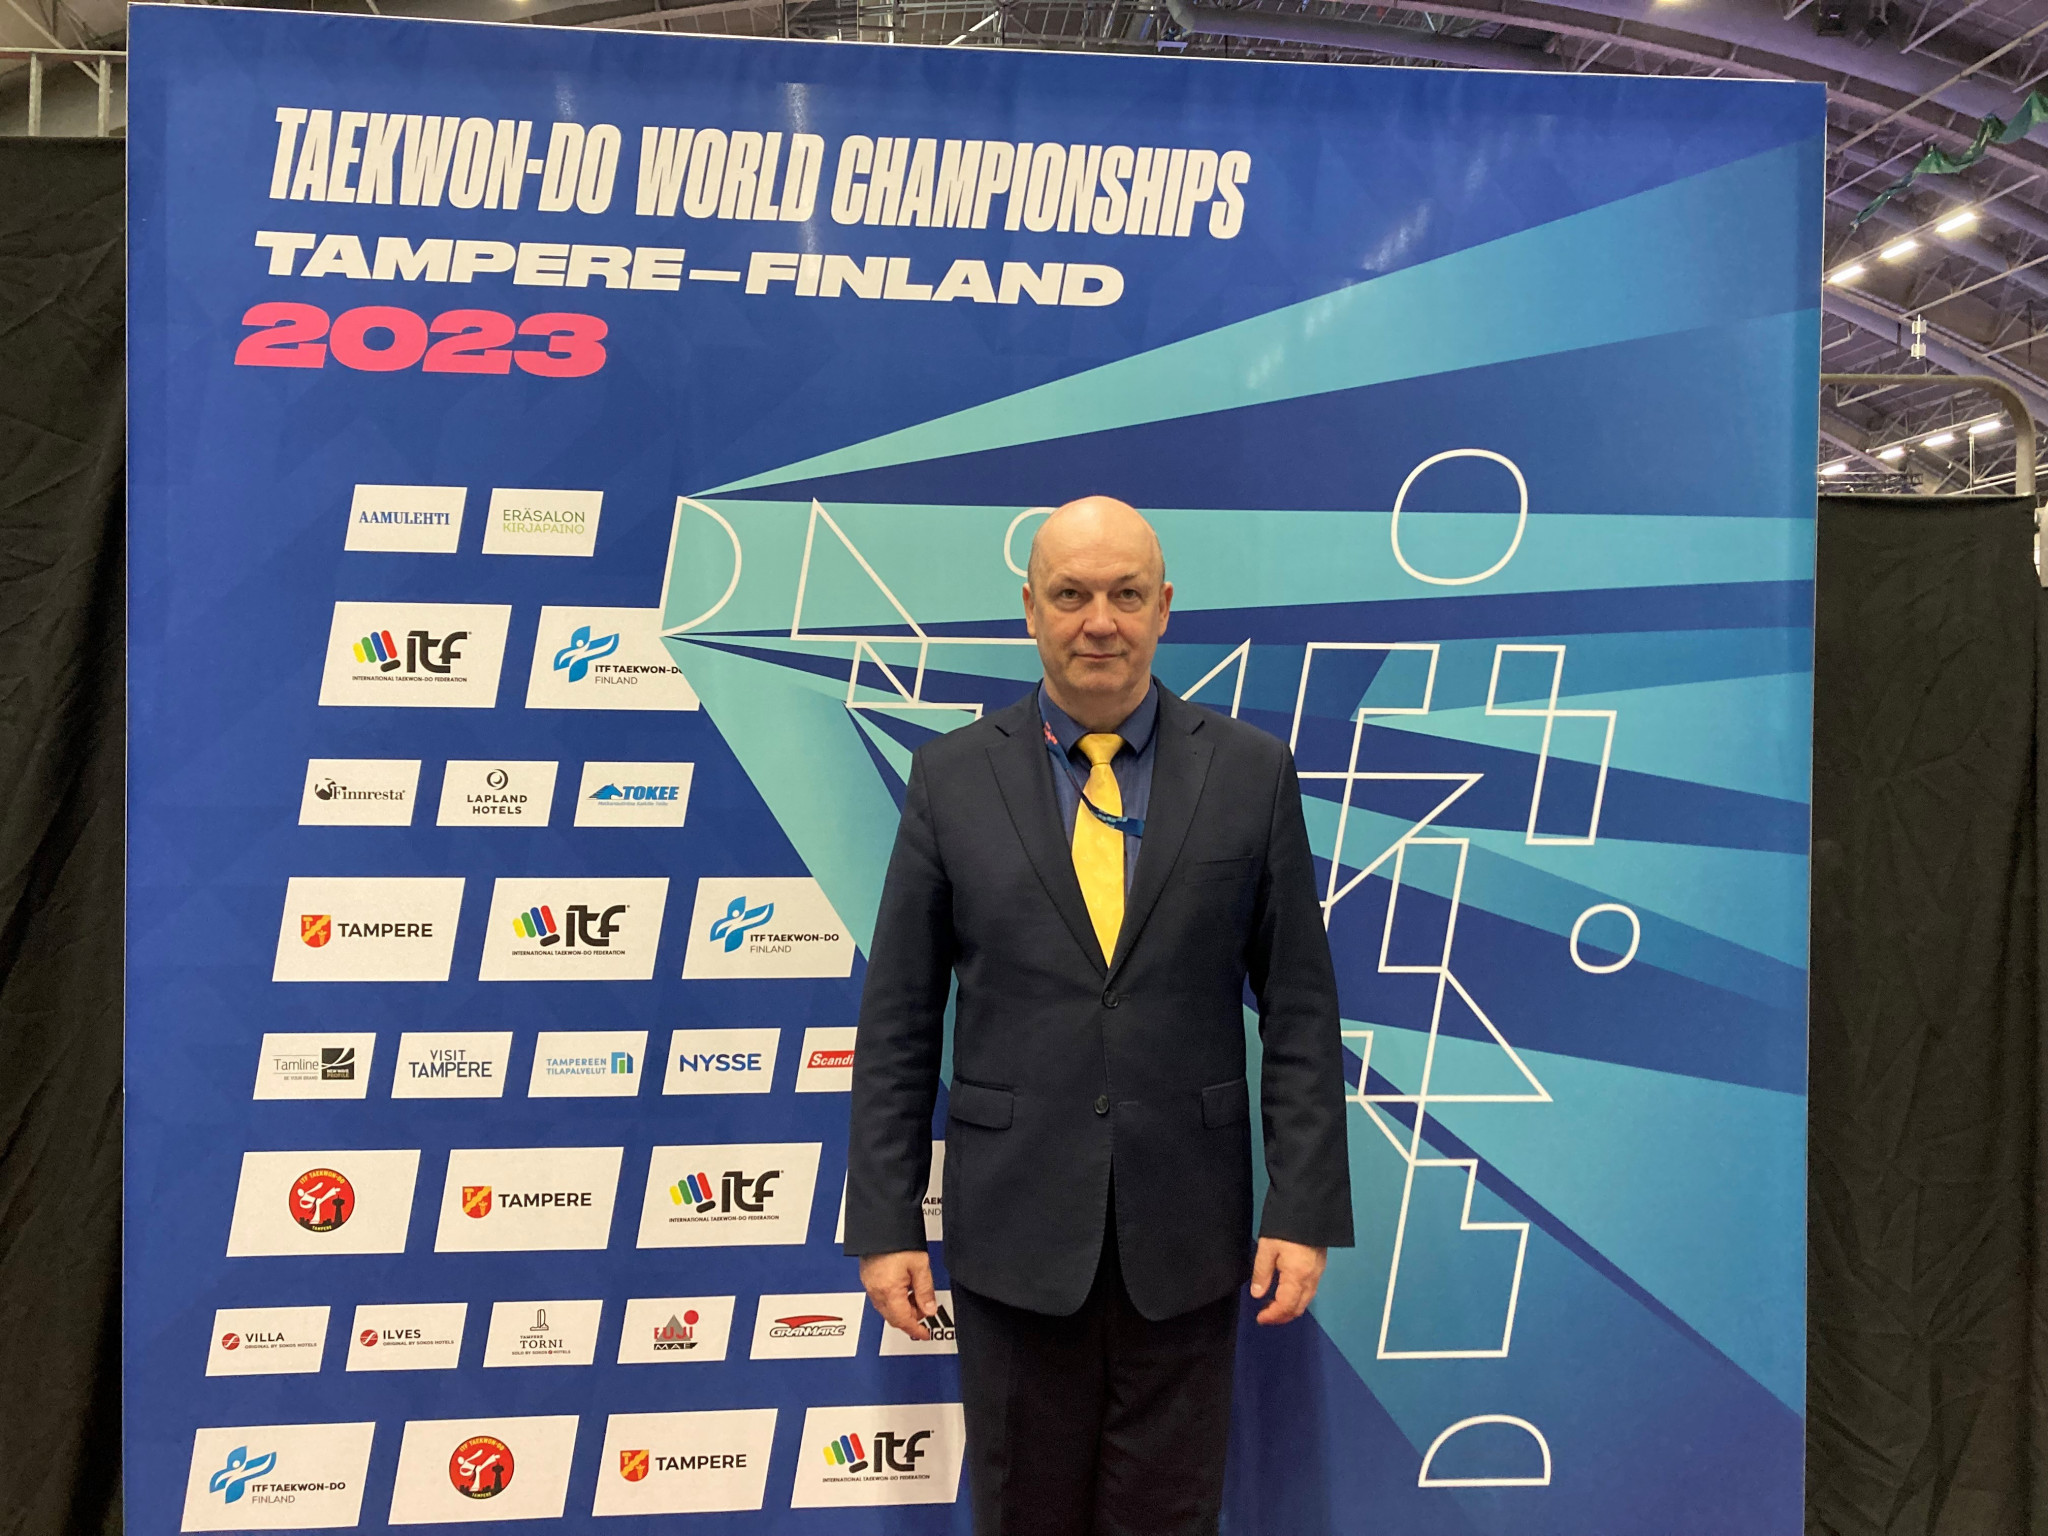 ITF secretary general Tadeusz Łoboda stressed improving the sport's structure in Asia is a 